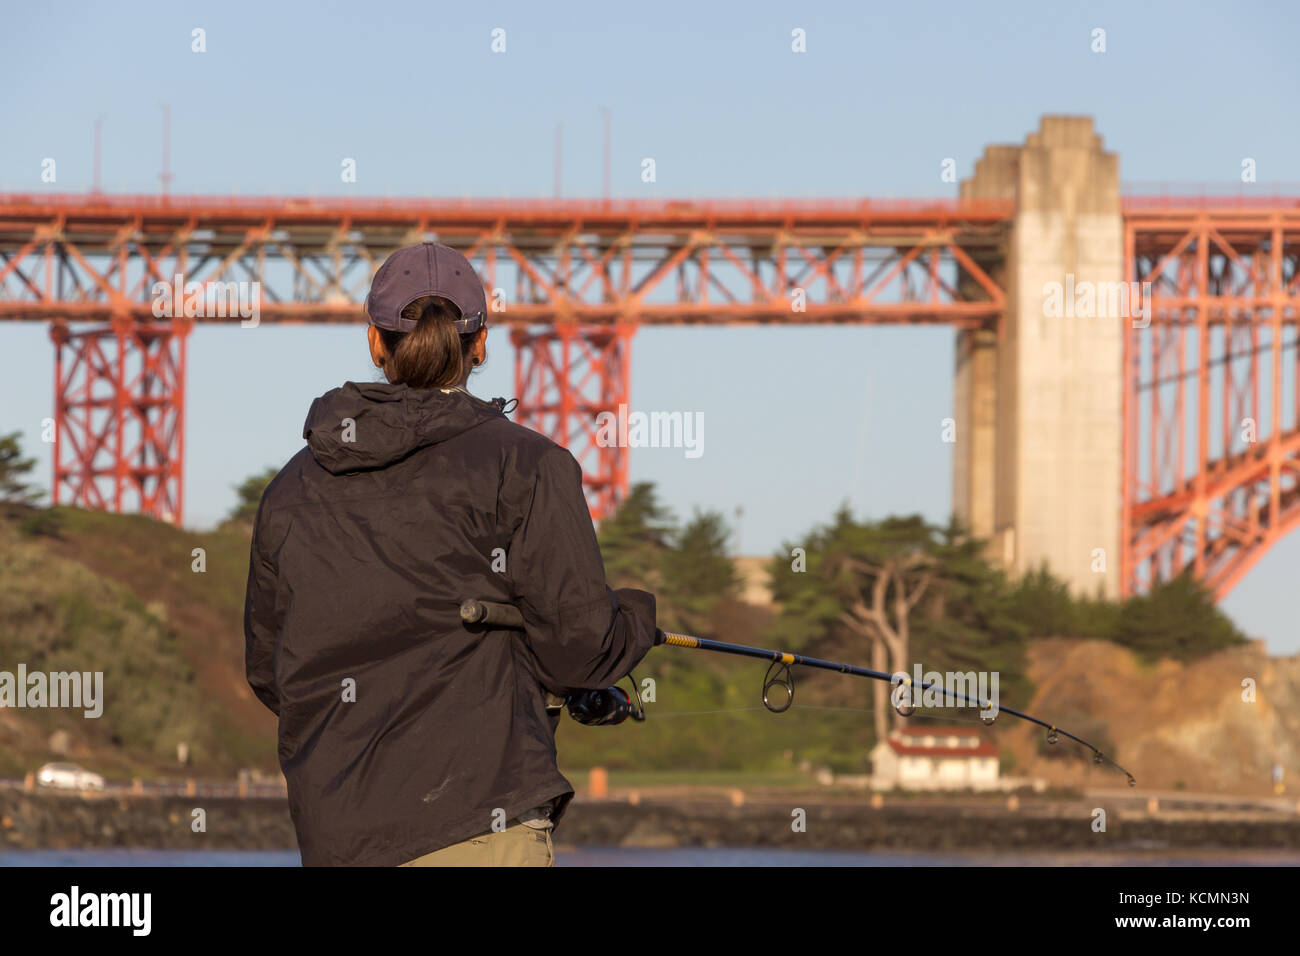 Rear view of a man fishing at Torpedo wharf Crissy Field vey early in the morning, Golden Gate Bridge, San Francisco. Stock Photo